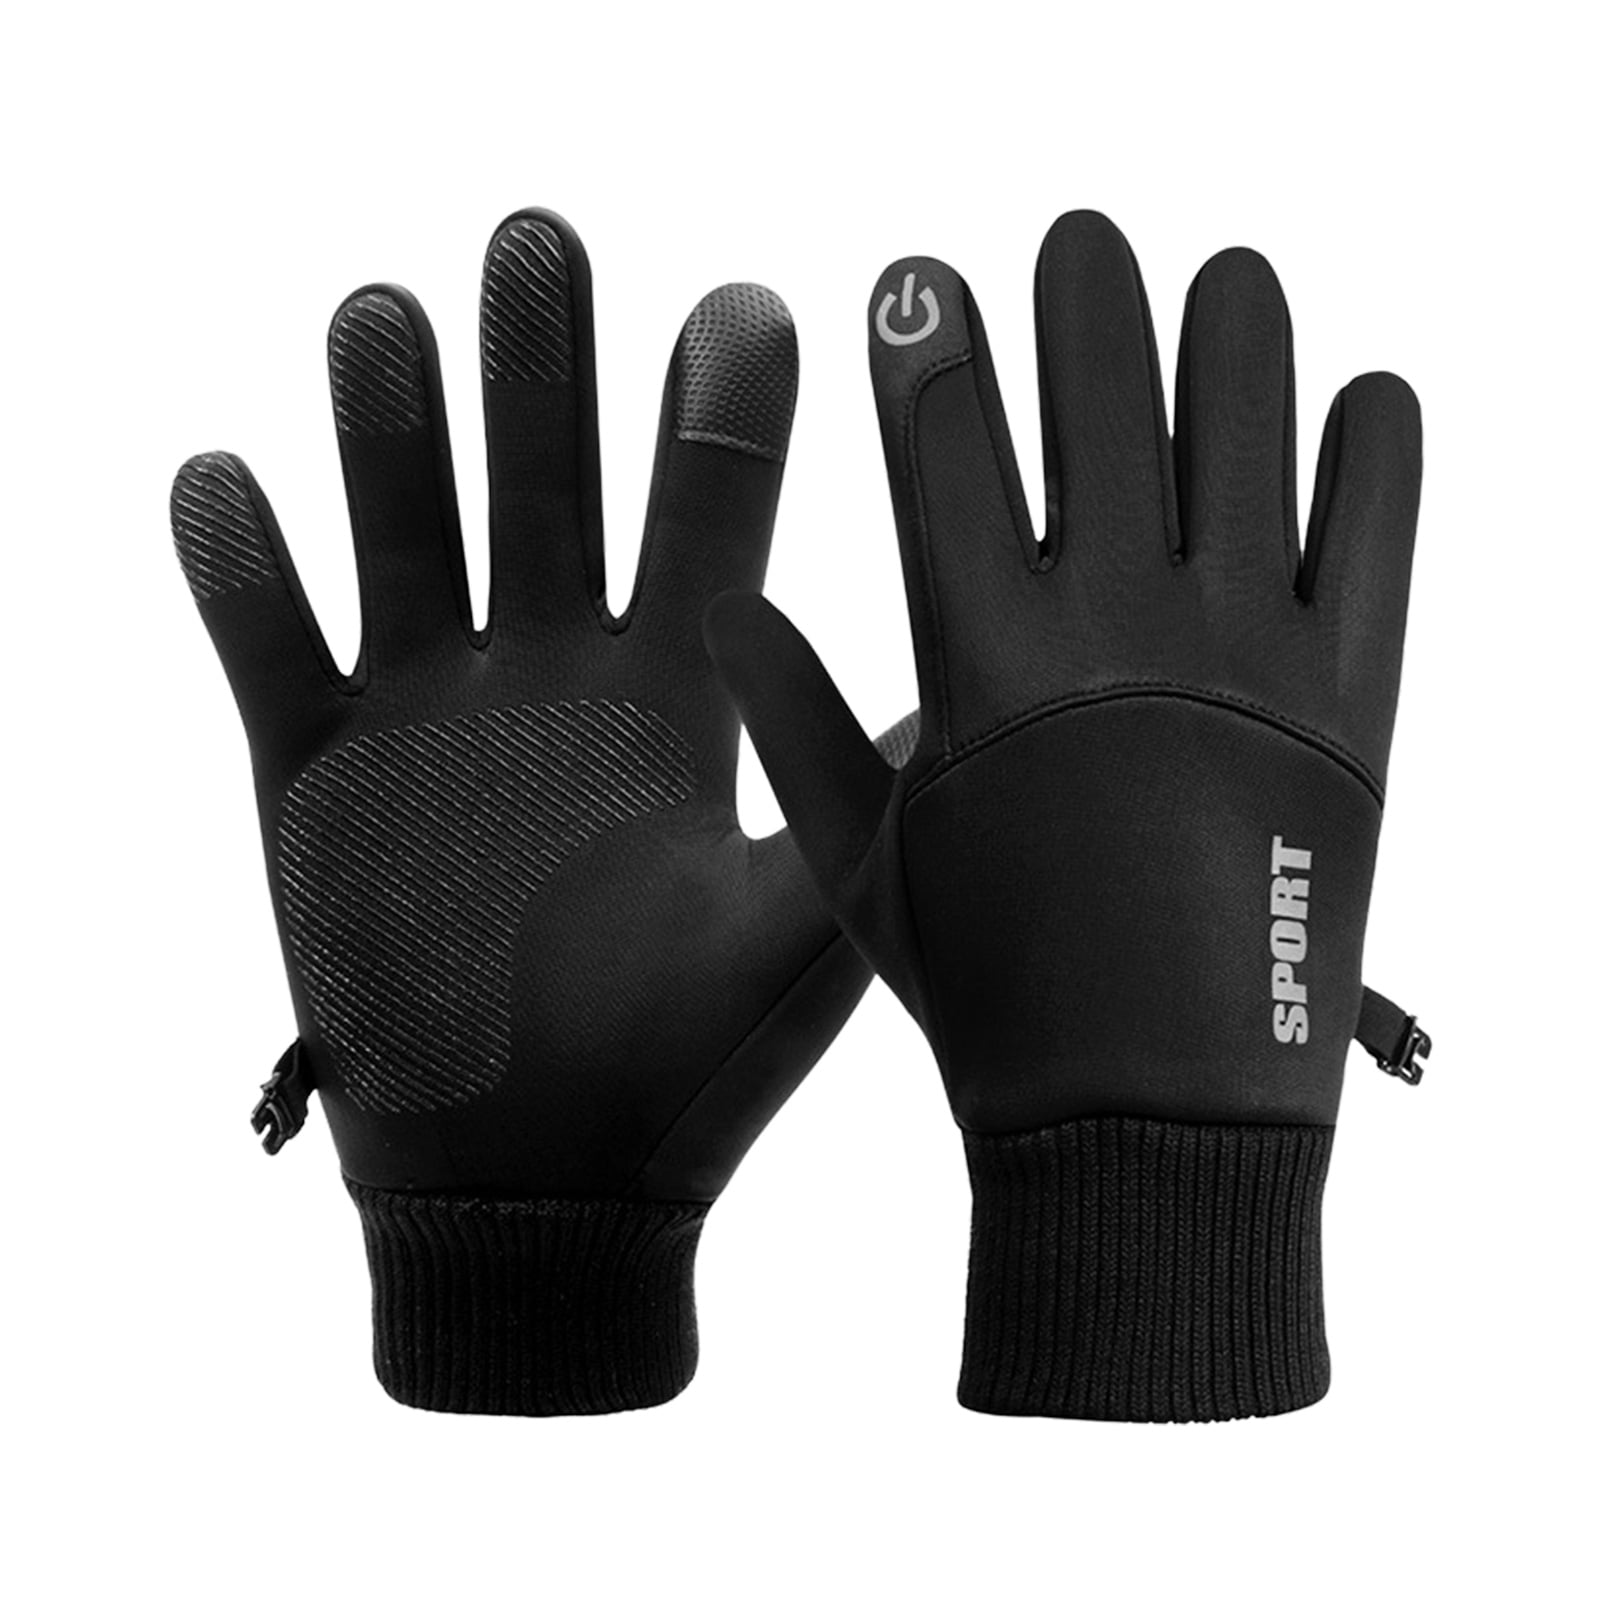 Unisex Winter Gloves Waterproof Windproof Touch Screen Non-slip Grip for Driving 